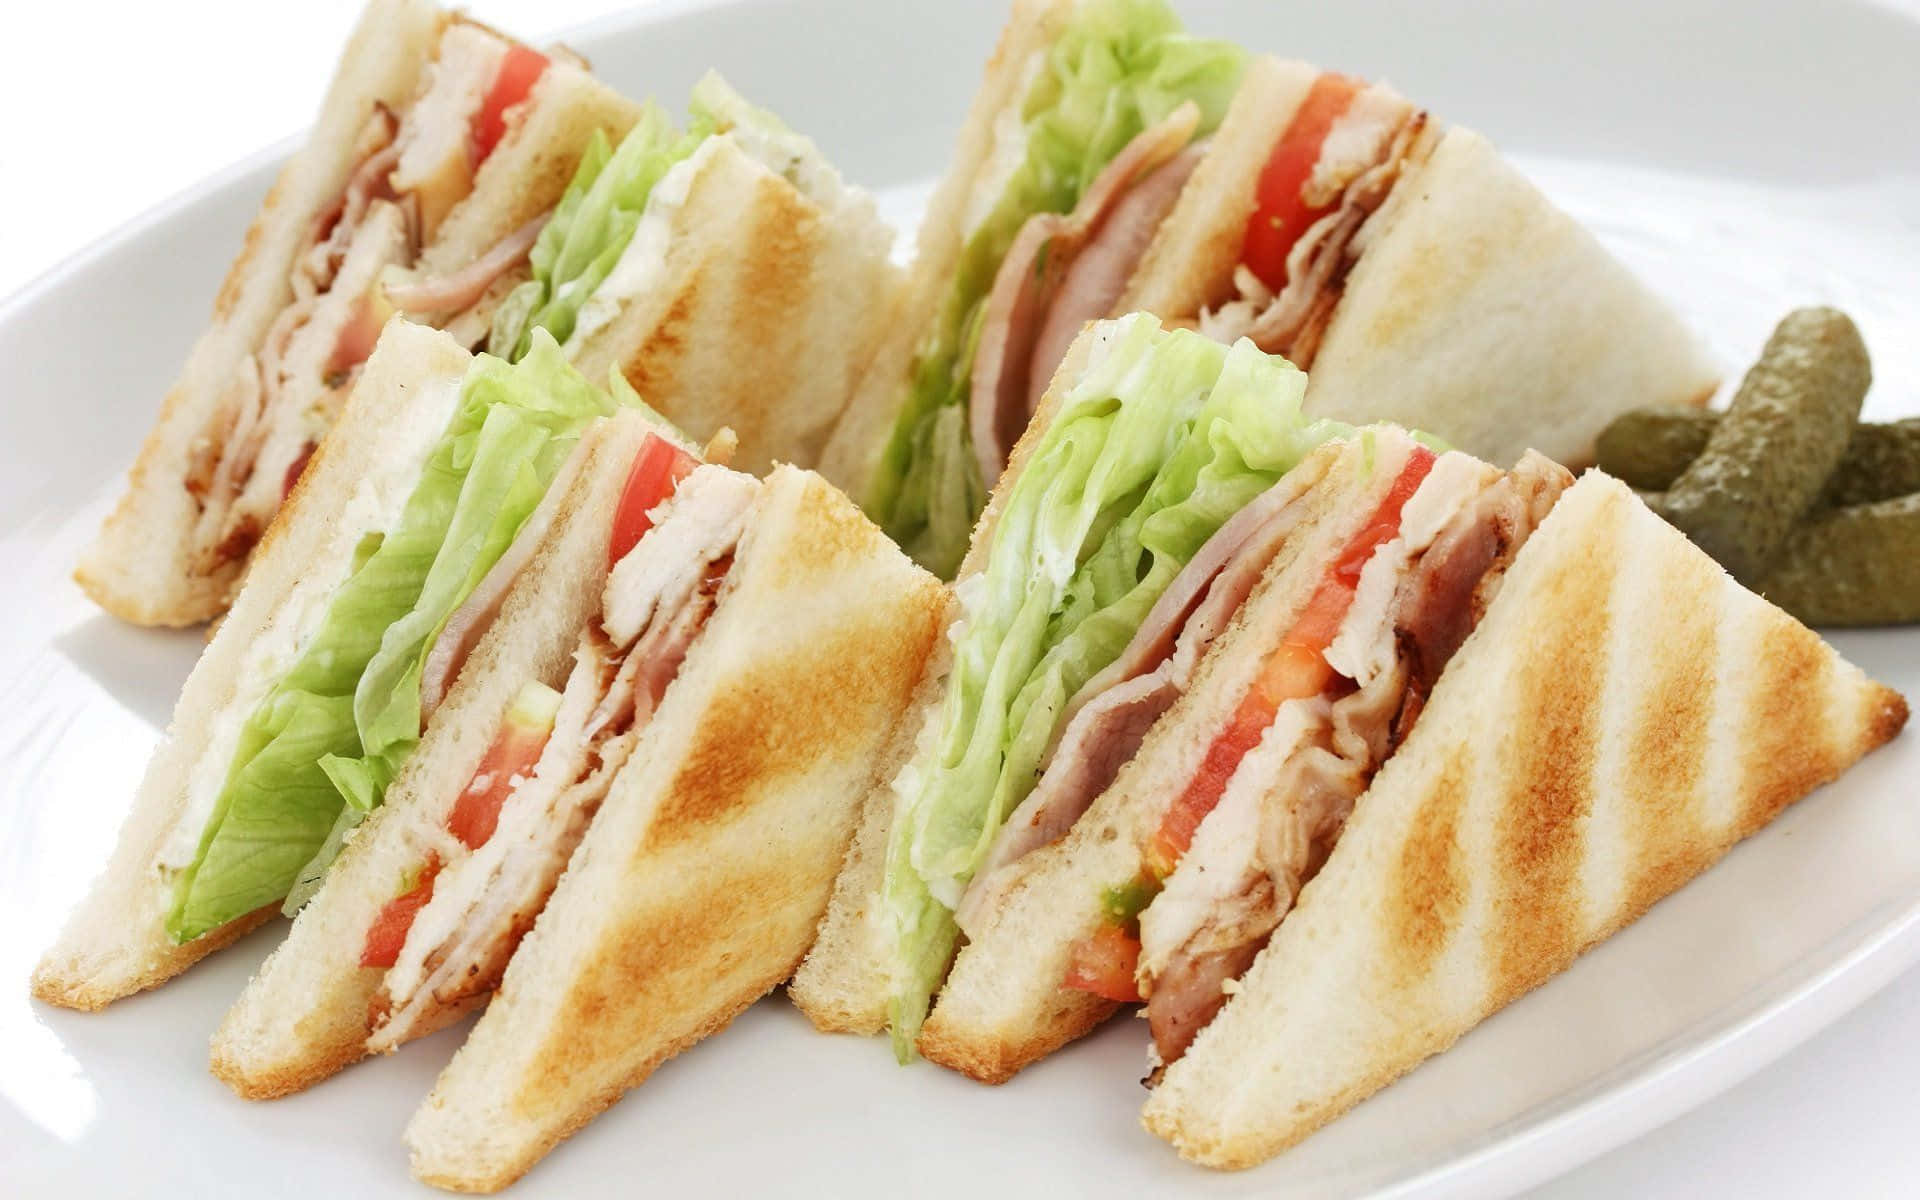 A Plate With Sandwiches On It